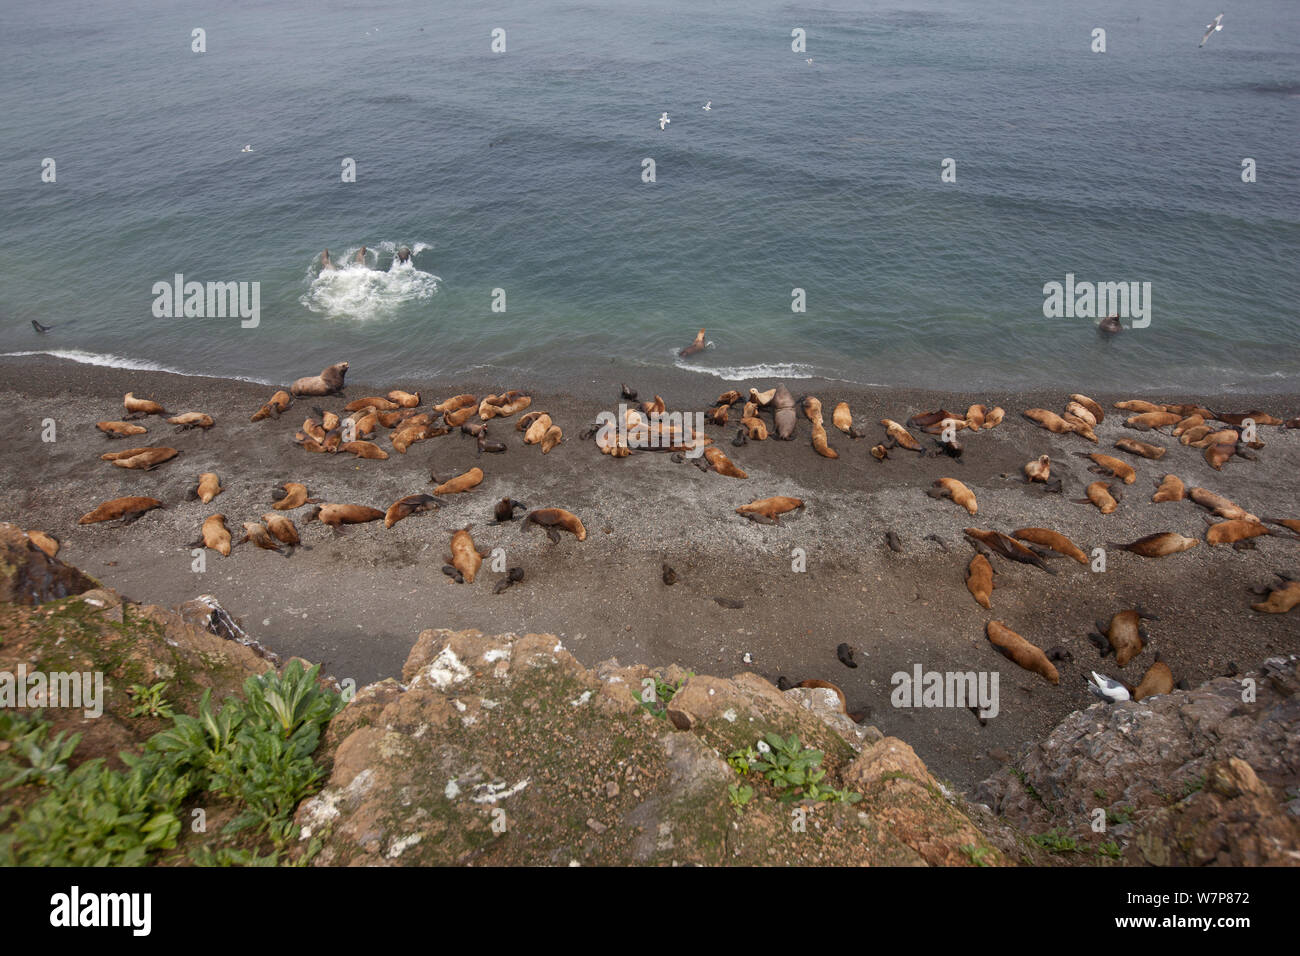 Northern fur seals (Callorhinus ursinus) looking down on breeding colony with male, female and new born pups all resting on Tyuleniy Island, Russian Far East, June. Stock Photo